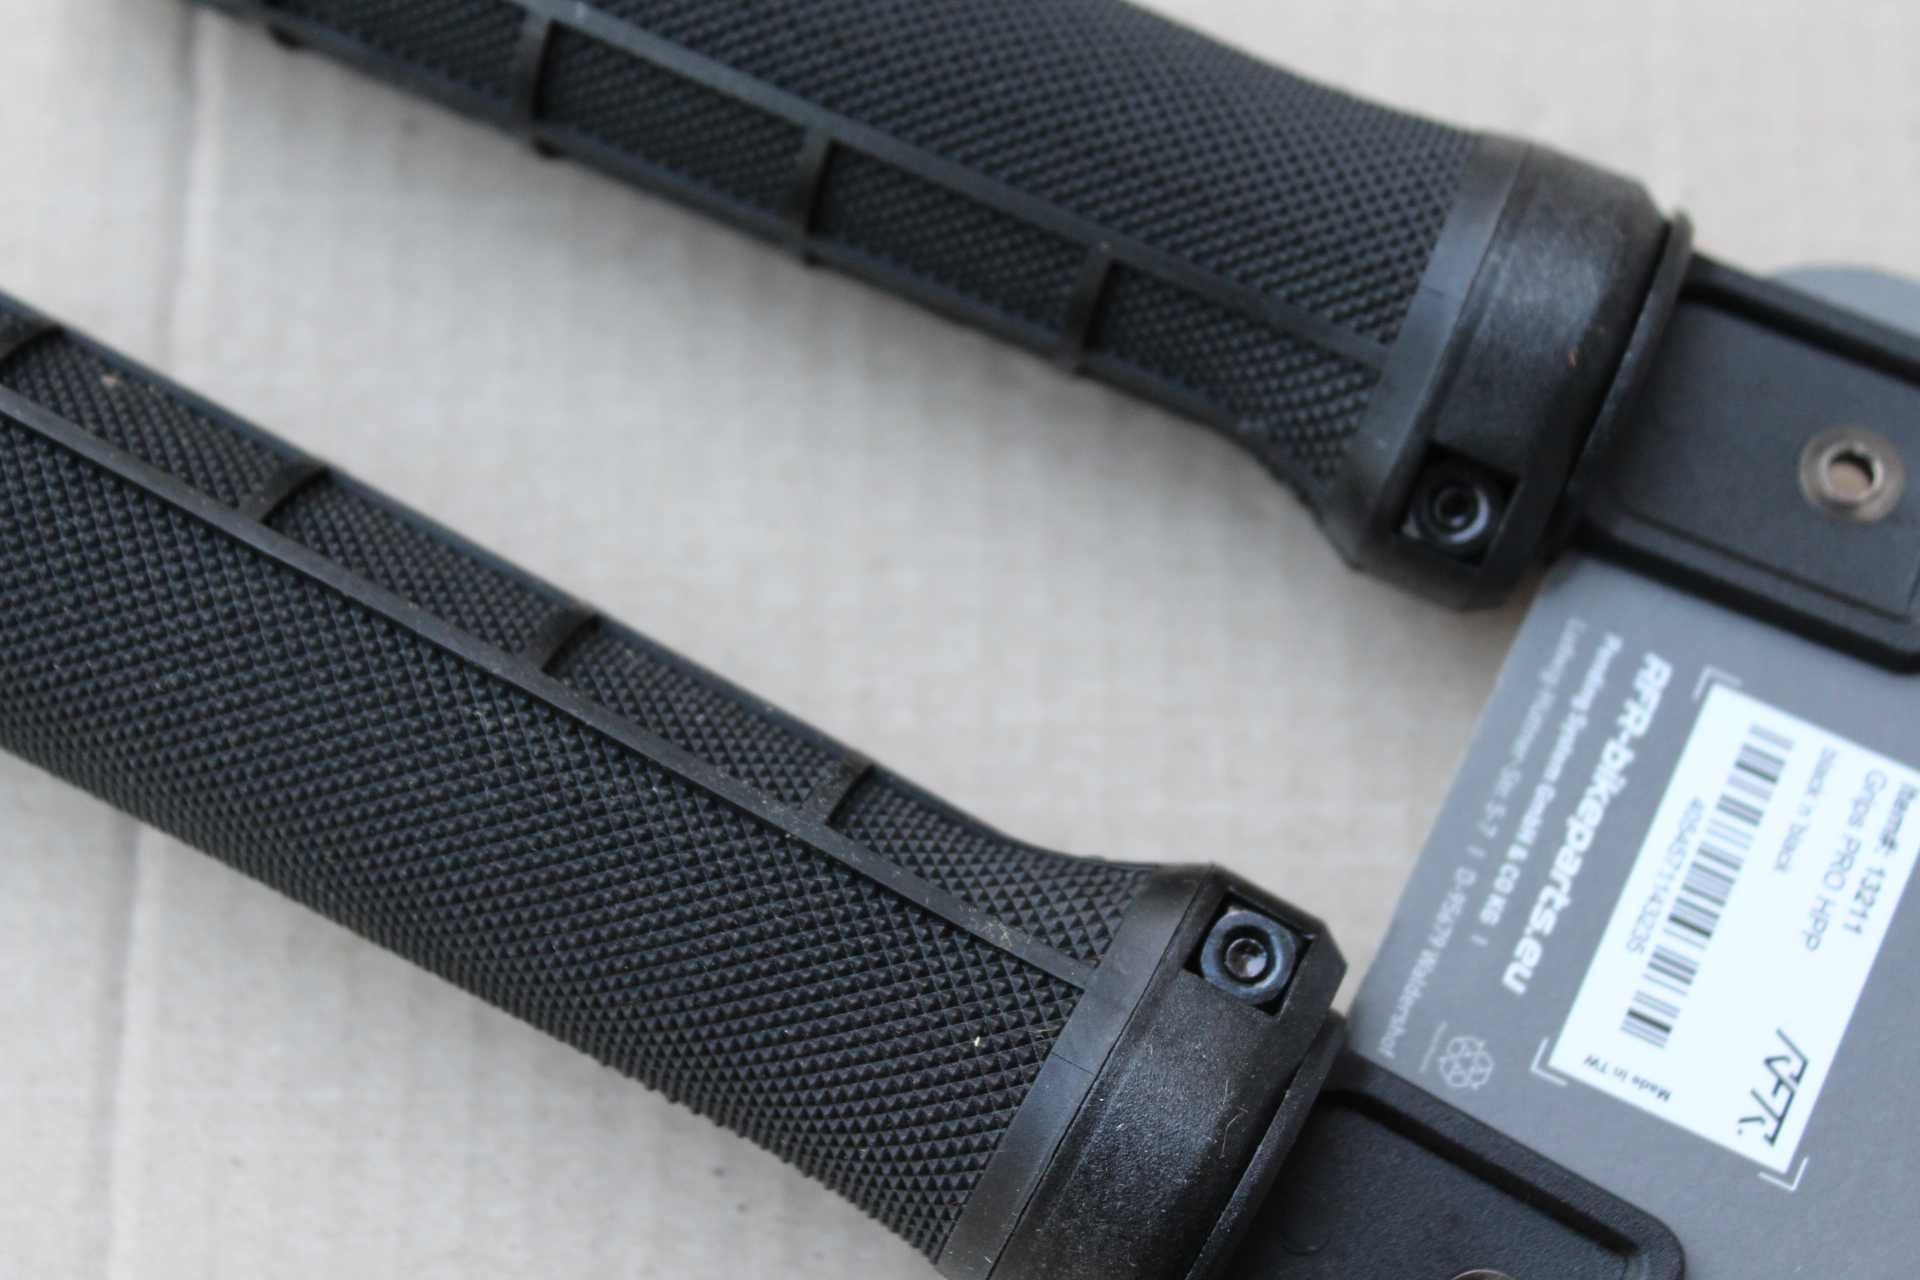 RFR Pro HPA Lock-on grips by Cube